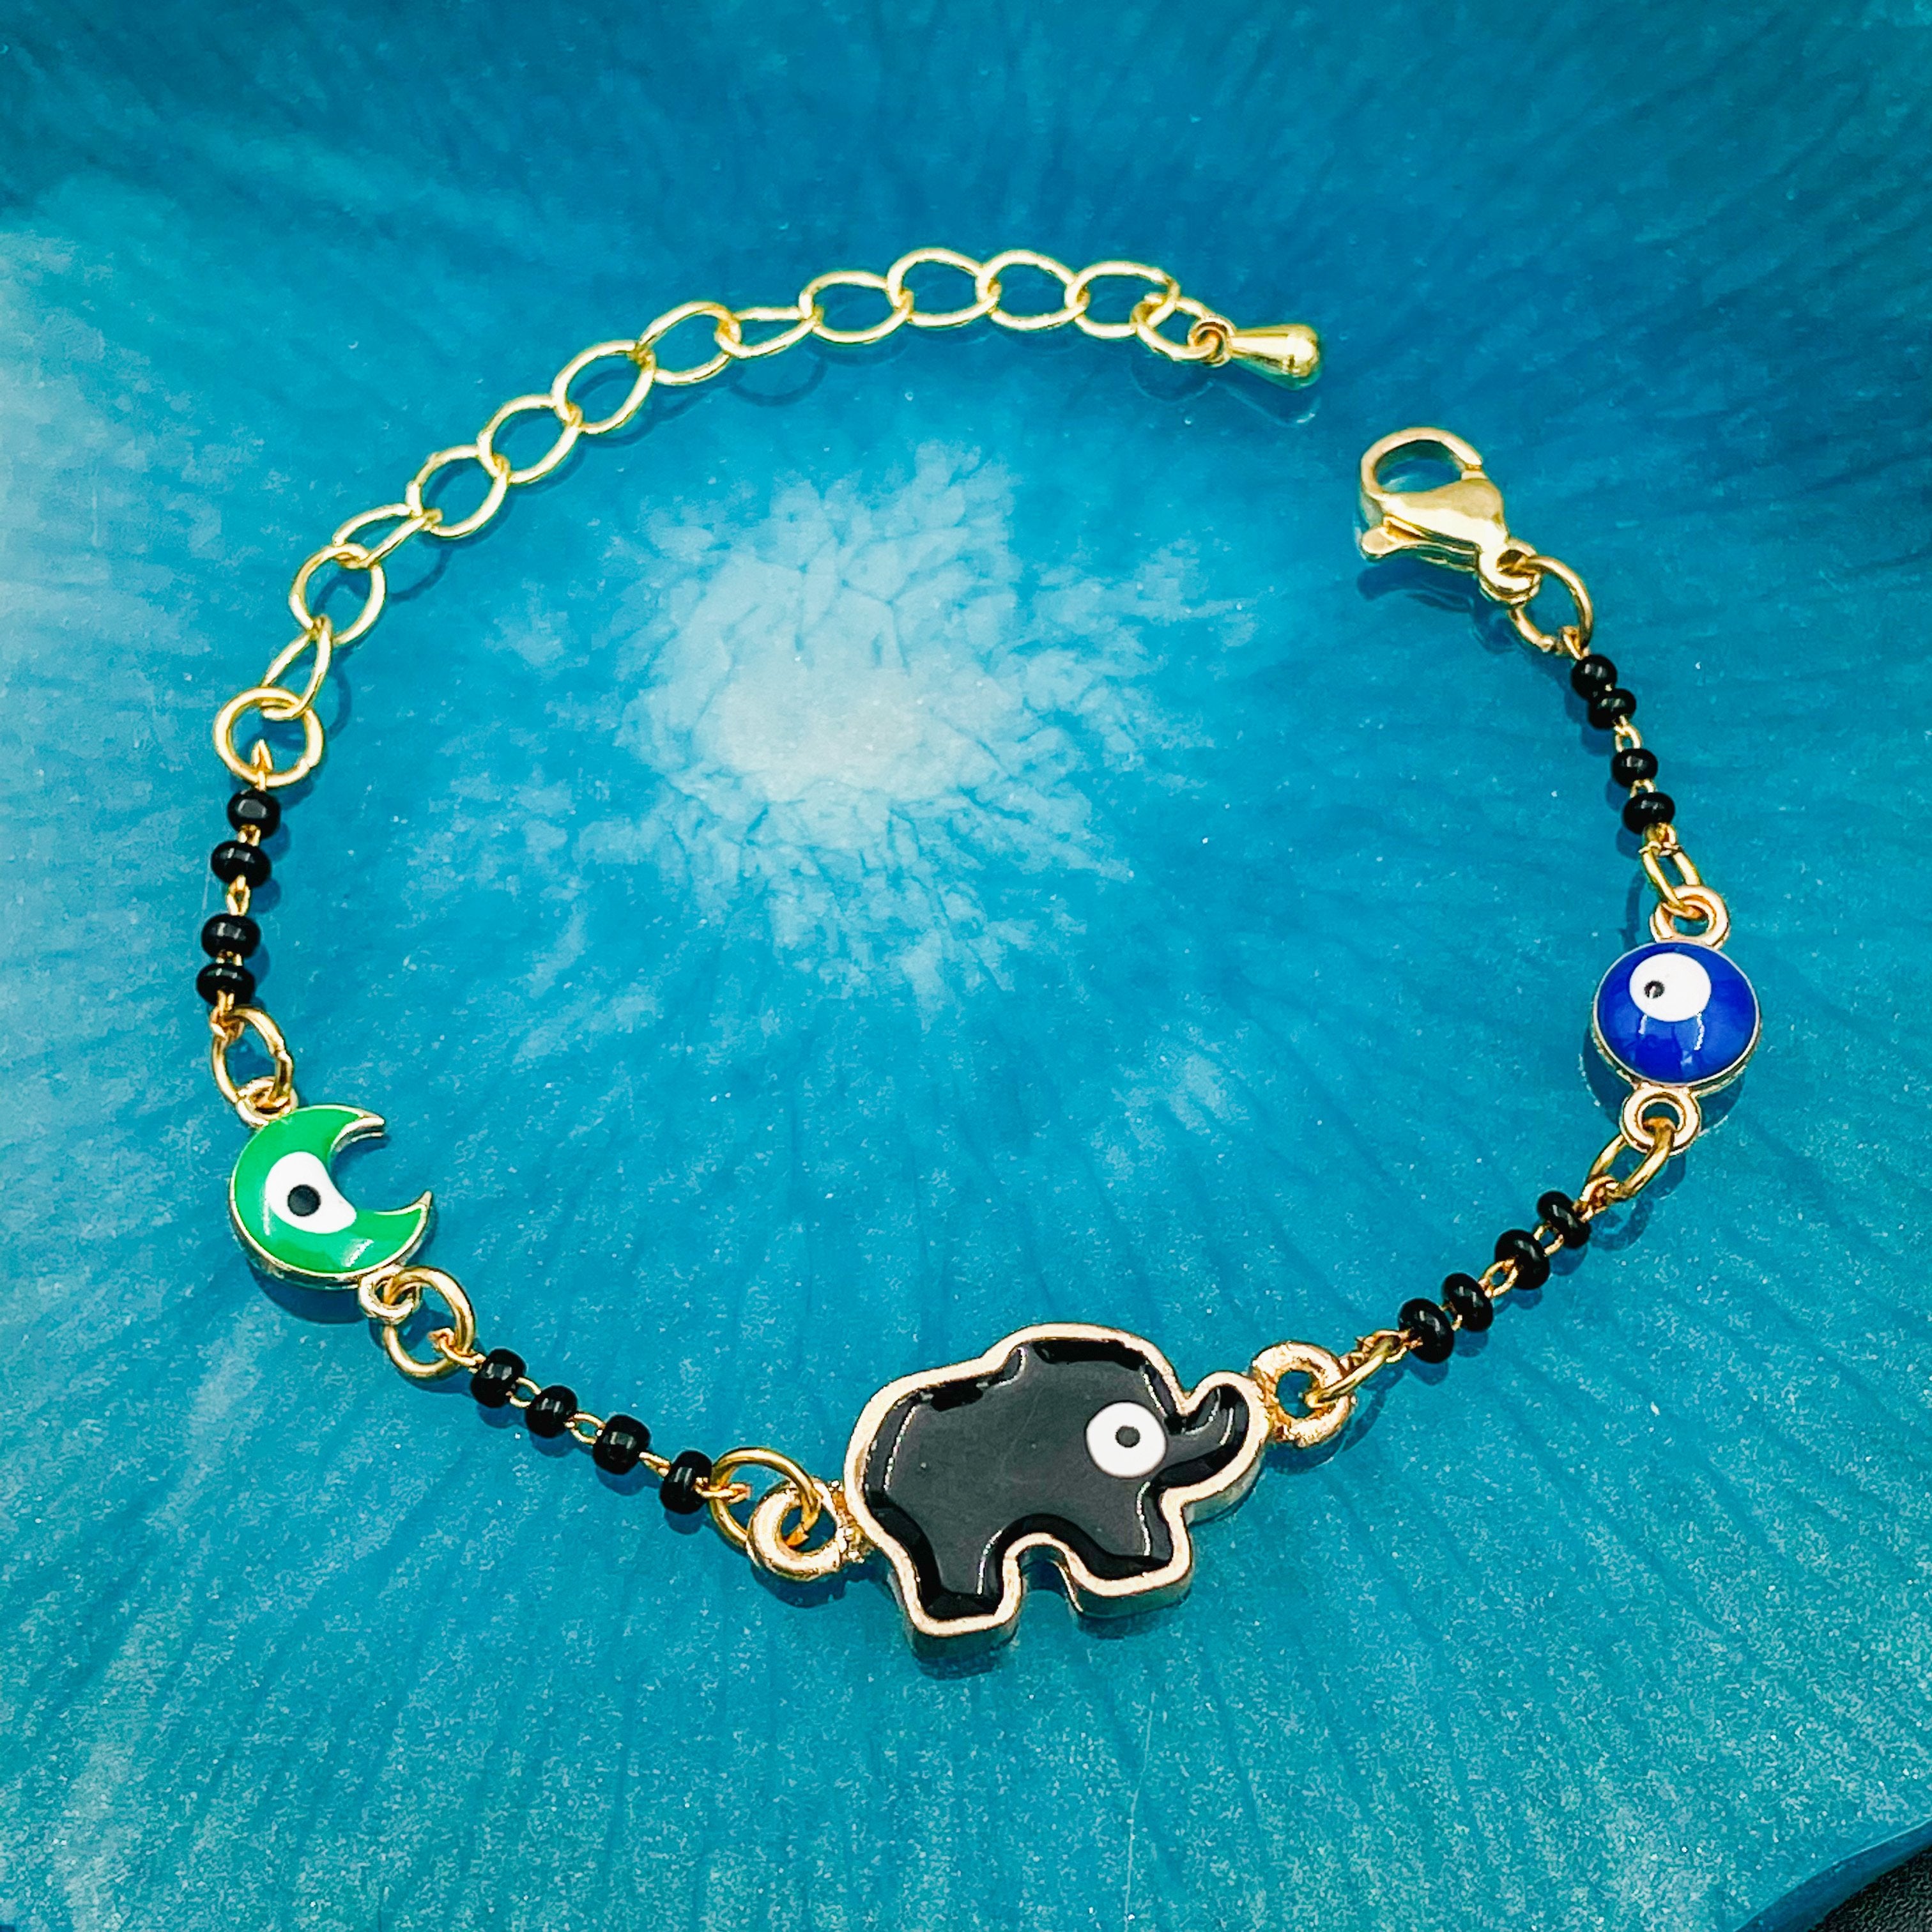 Buy Elephant Bracelet in Sterling Silver for Good Luck Om Pooja Shop Online  at Low Prices in India  Amazonin